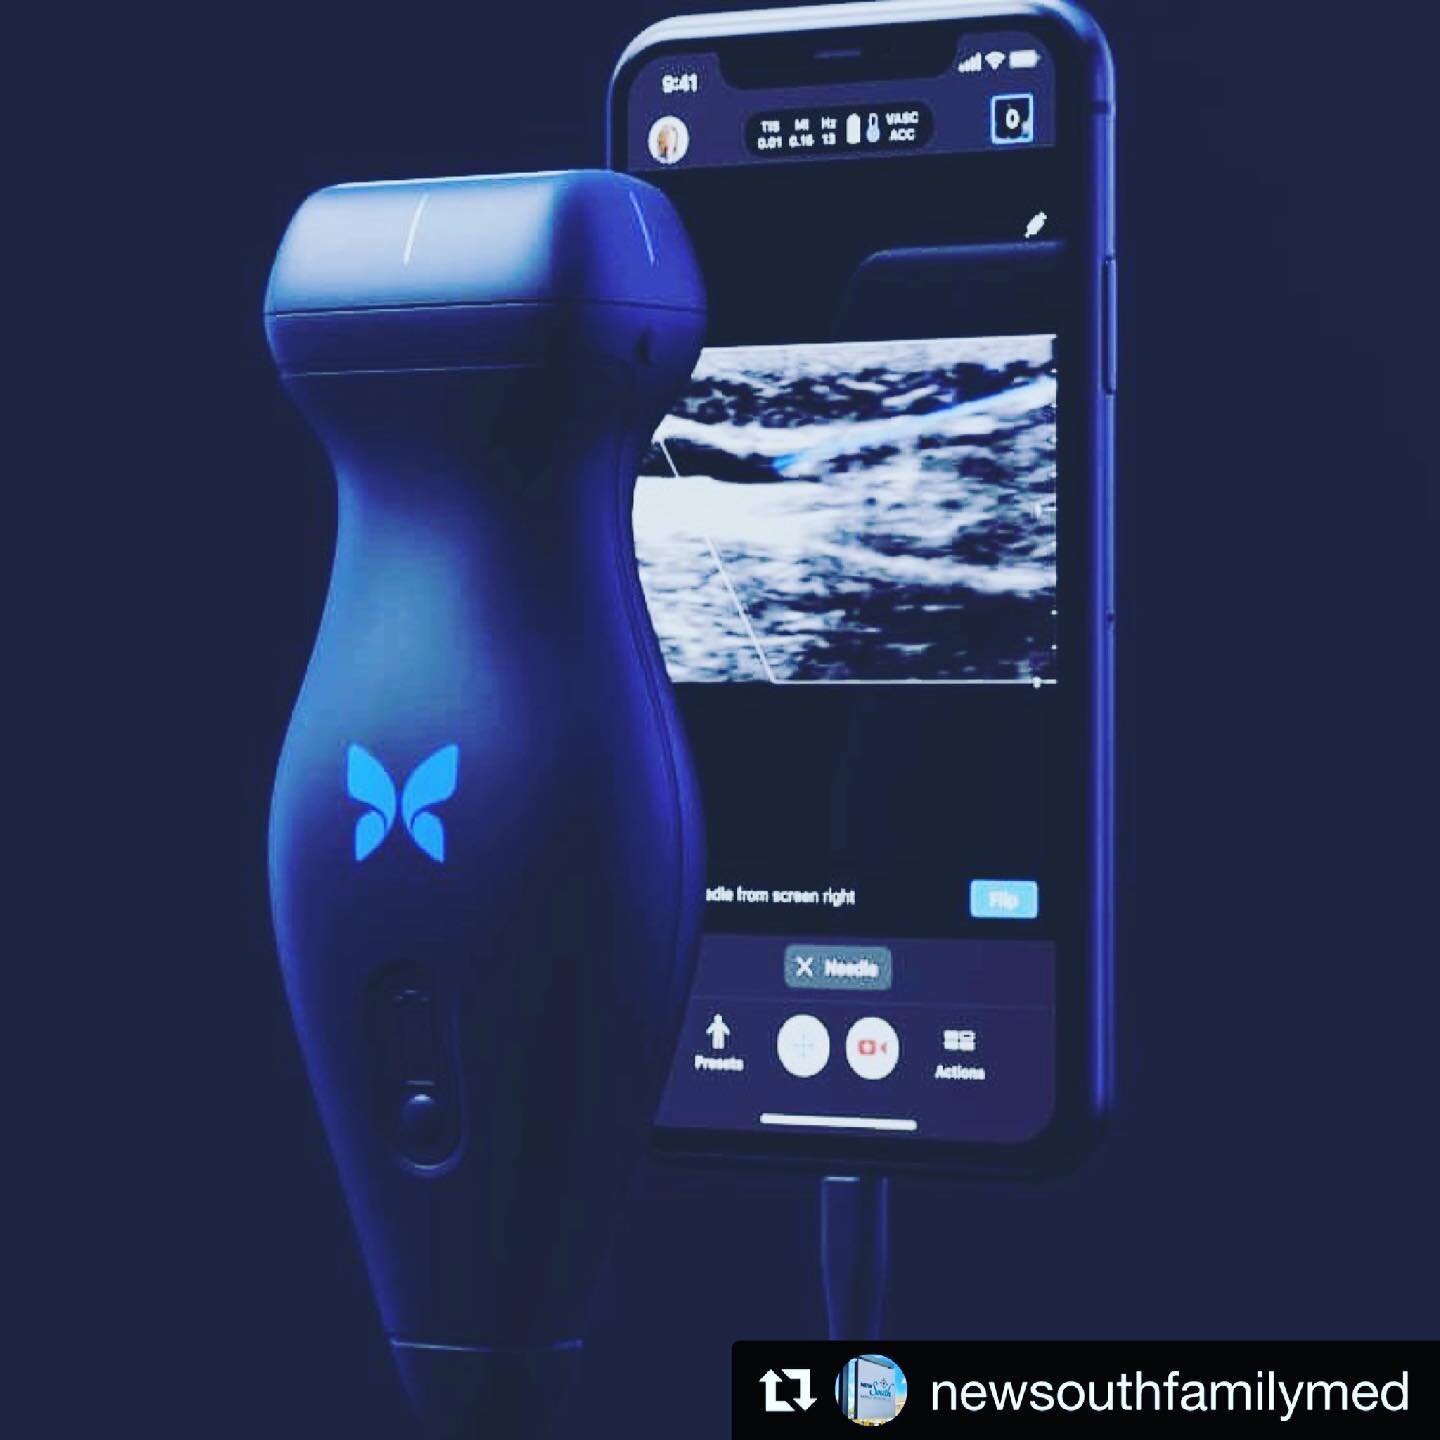 Very thankful to have the opportunity to learn and practice new skills with the best DPC doc in the business. Iron sharpens iron 💪🏽 🤓
&bull; &bull; &bull;
#Repost @newsouthfamilymed
・・・
Does your doctor use an ultrasound for point of care diagnost